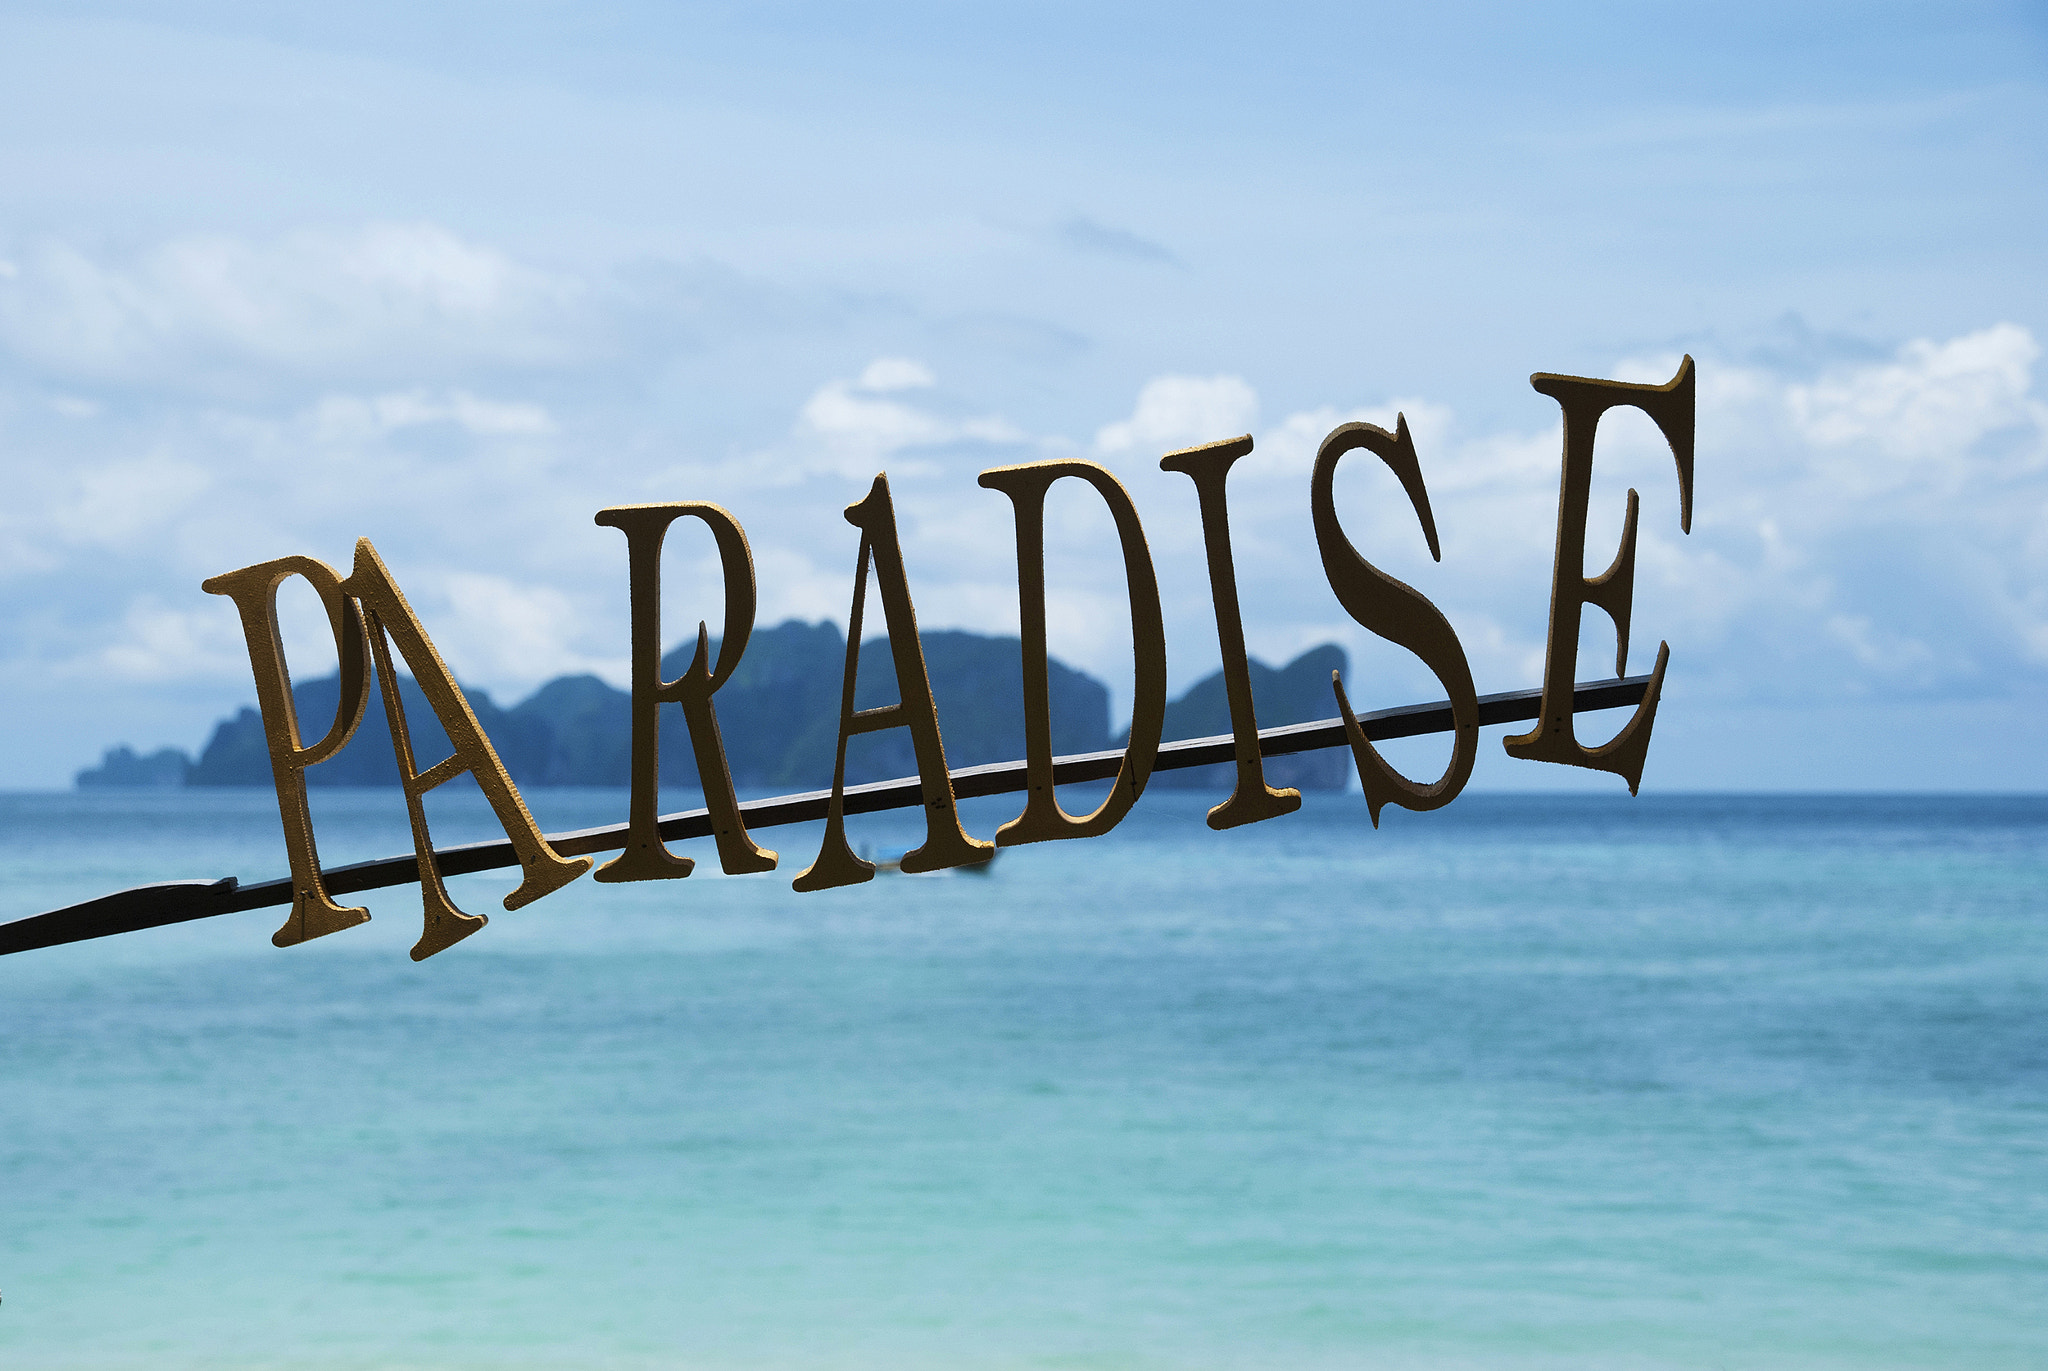 Nikon D80 + Nikon AF-S DX Nikkor 16-85mm F3.5-5.6G ED VR sample photo. Paradise sign with a sea and islands on background photography